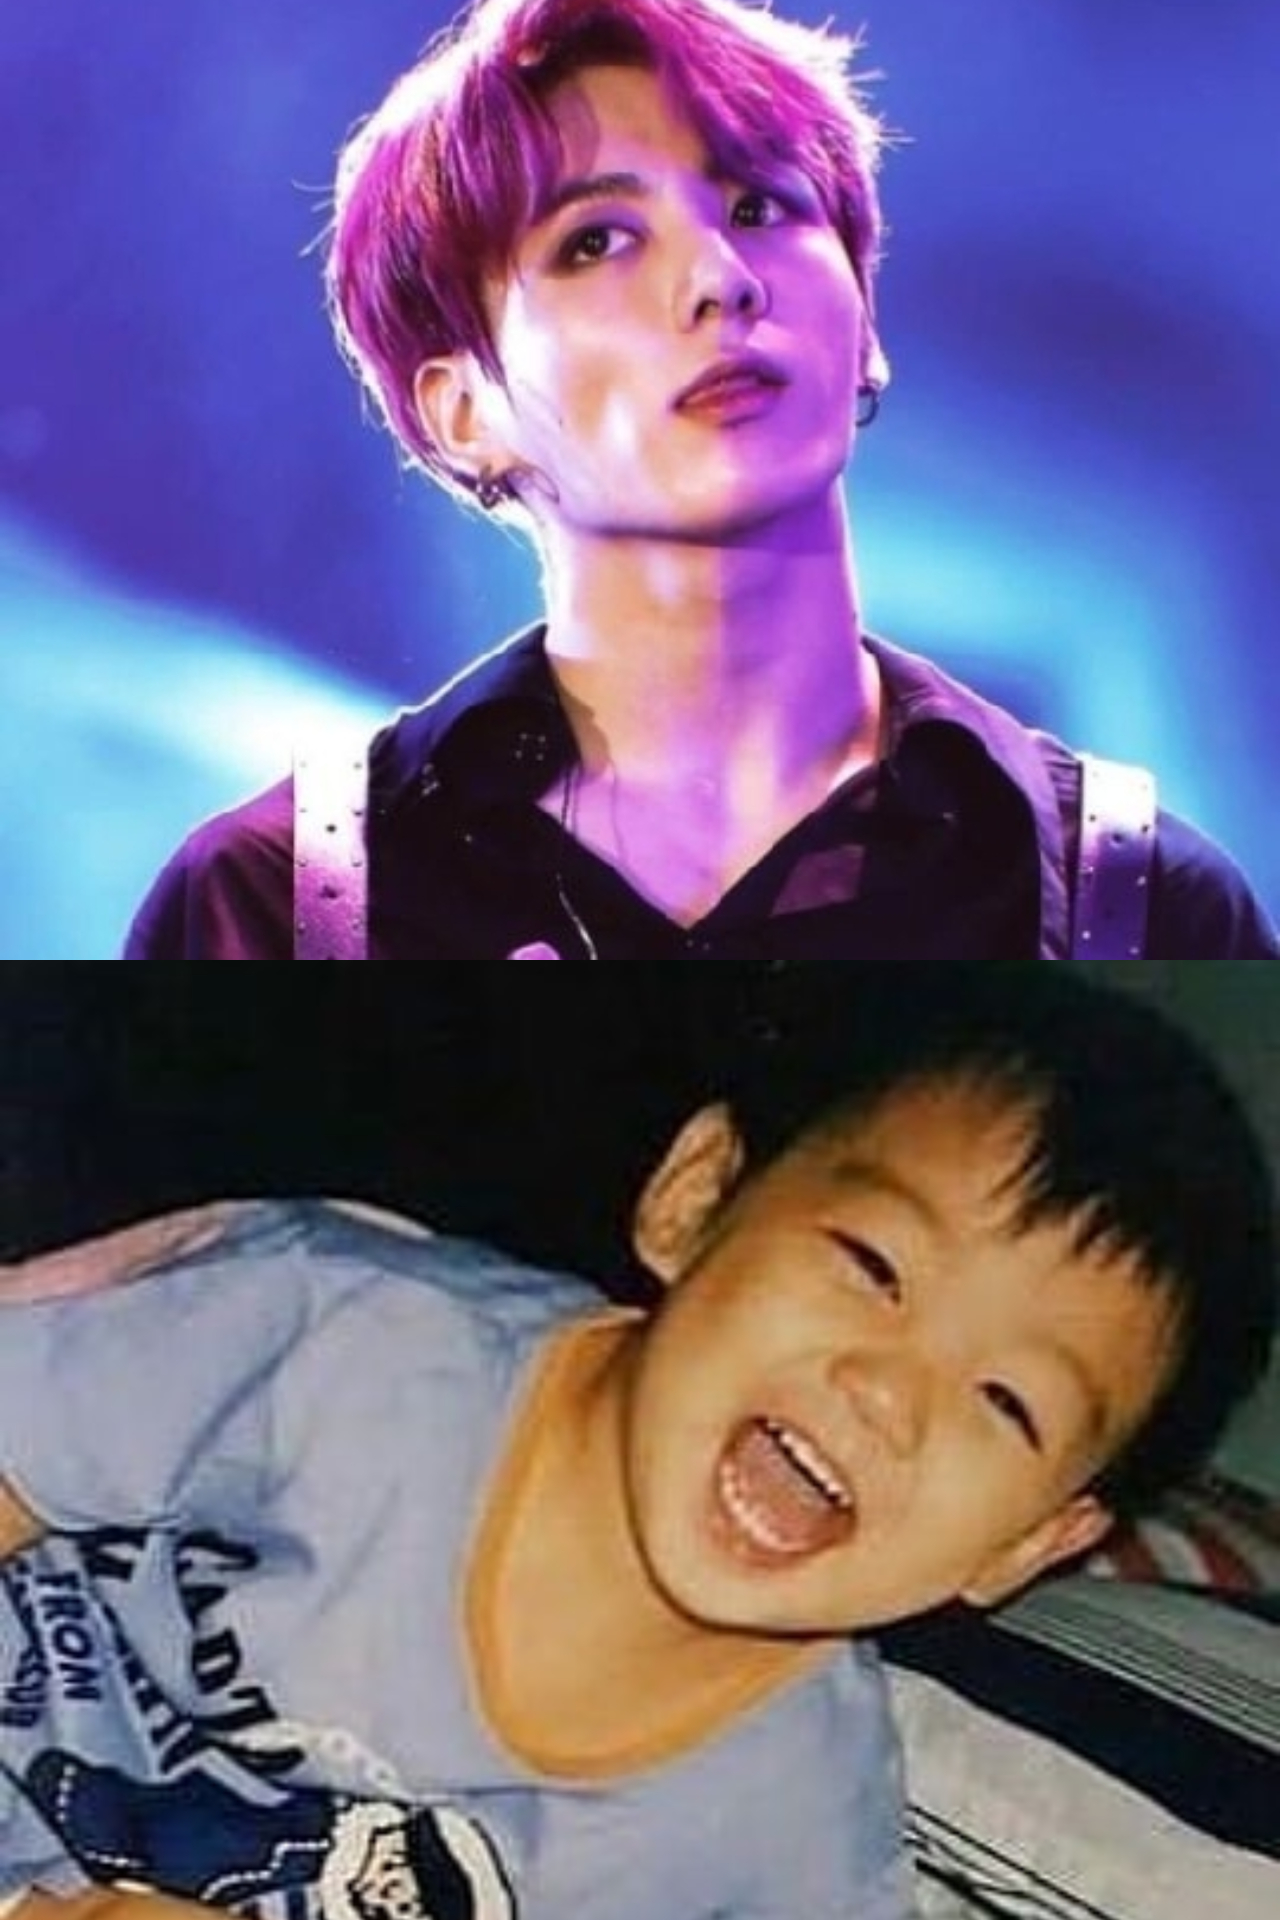 Bts Jungkook Childhood Photos Are Just Too Cute For Words | Birthday Special